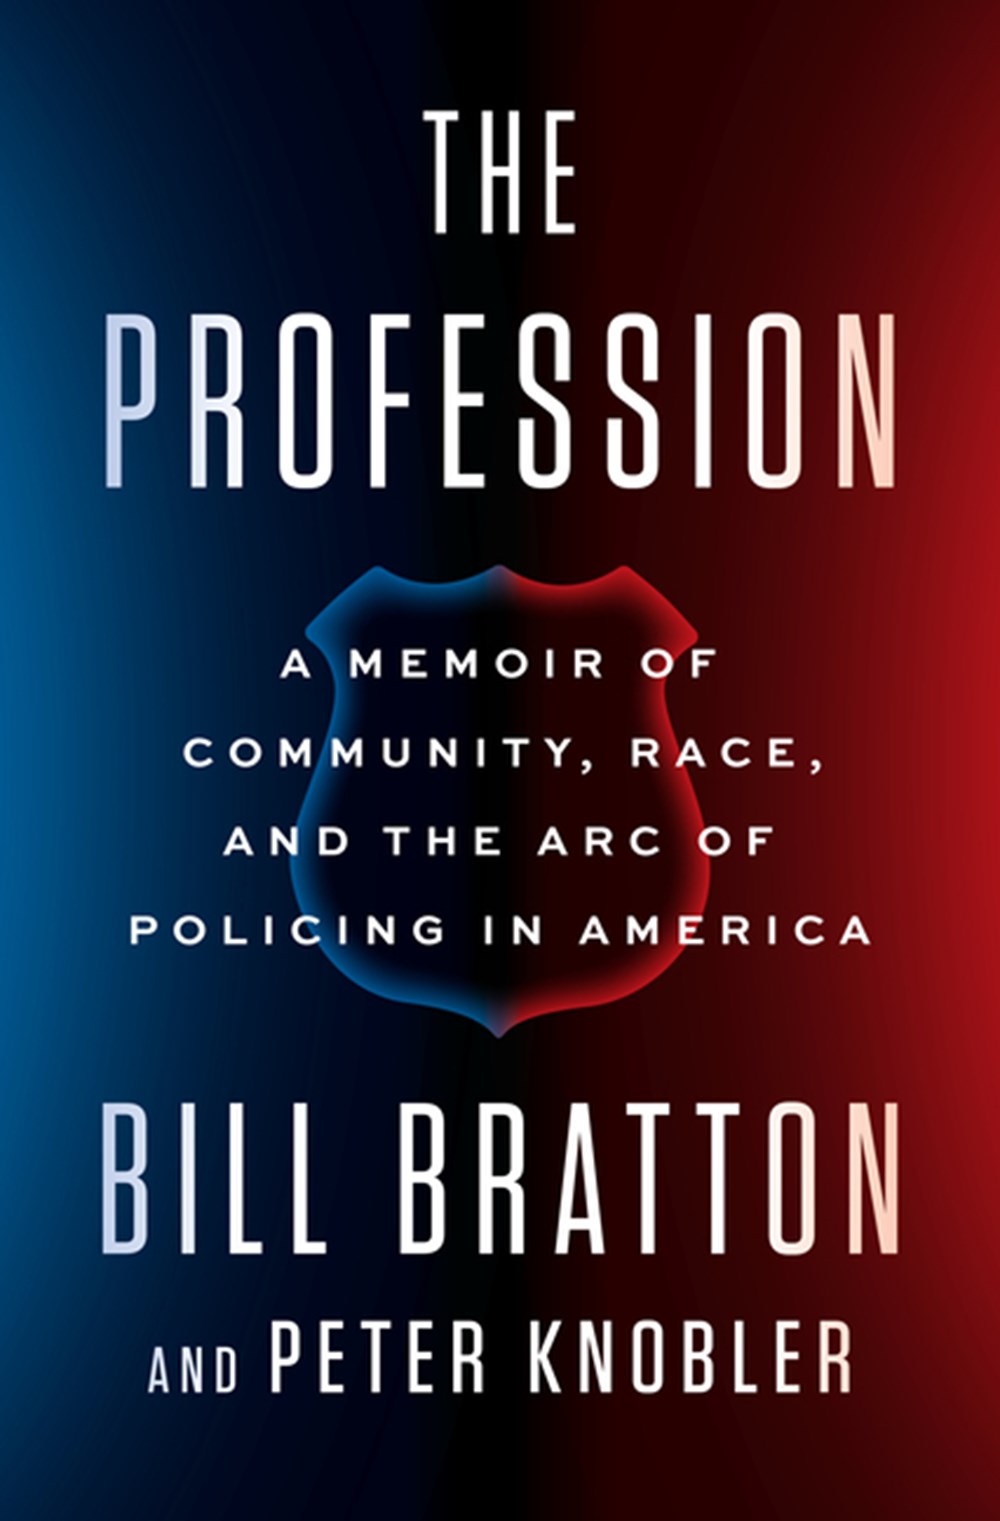 Profession A Memoir of Community, Race, and the Arc of Policing in America